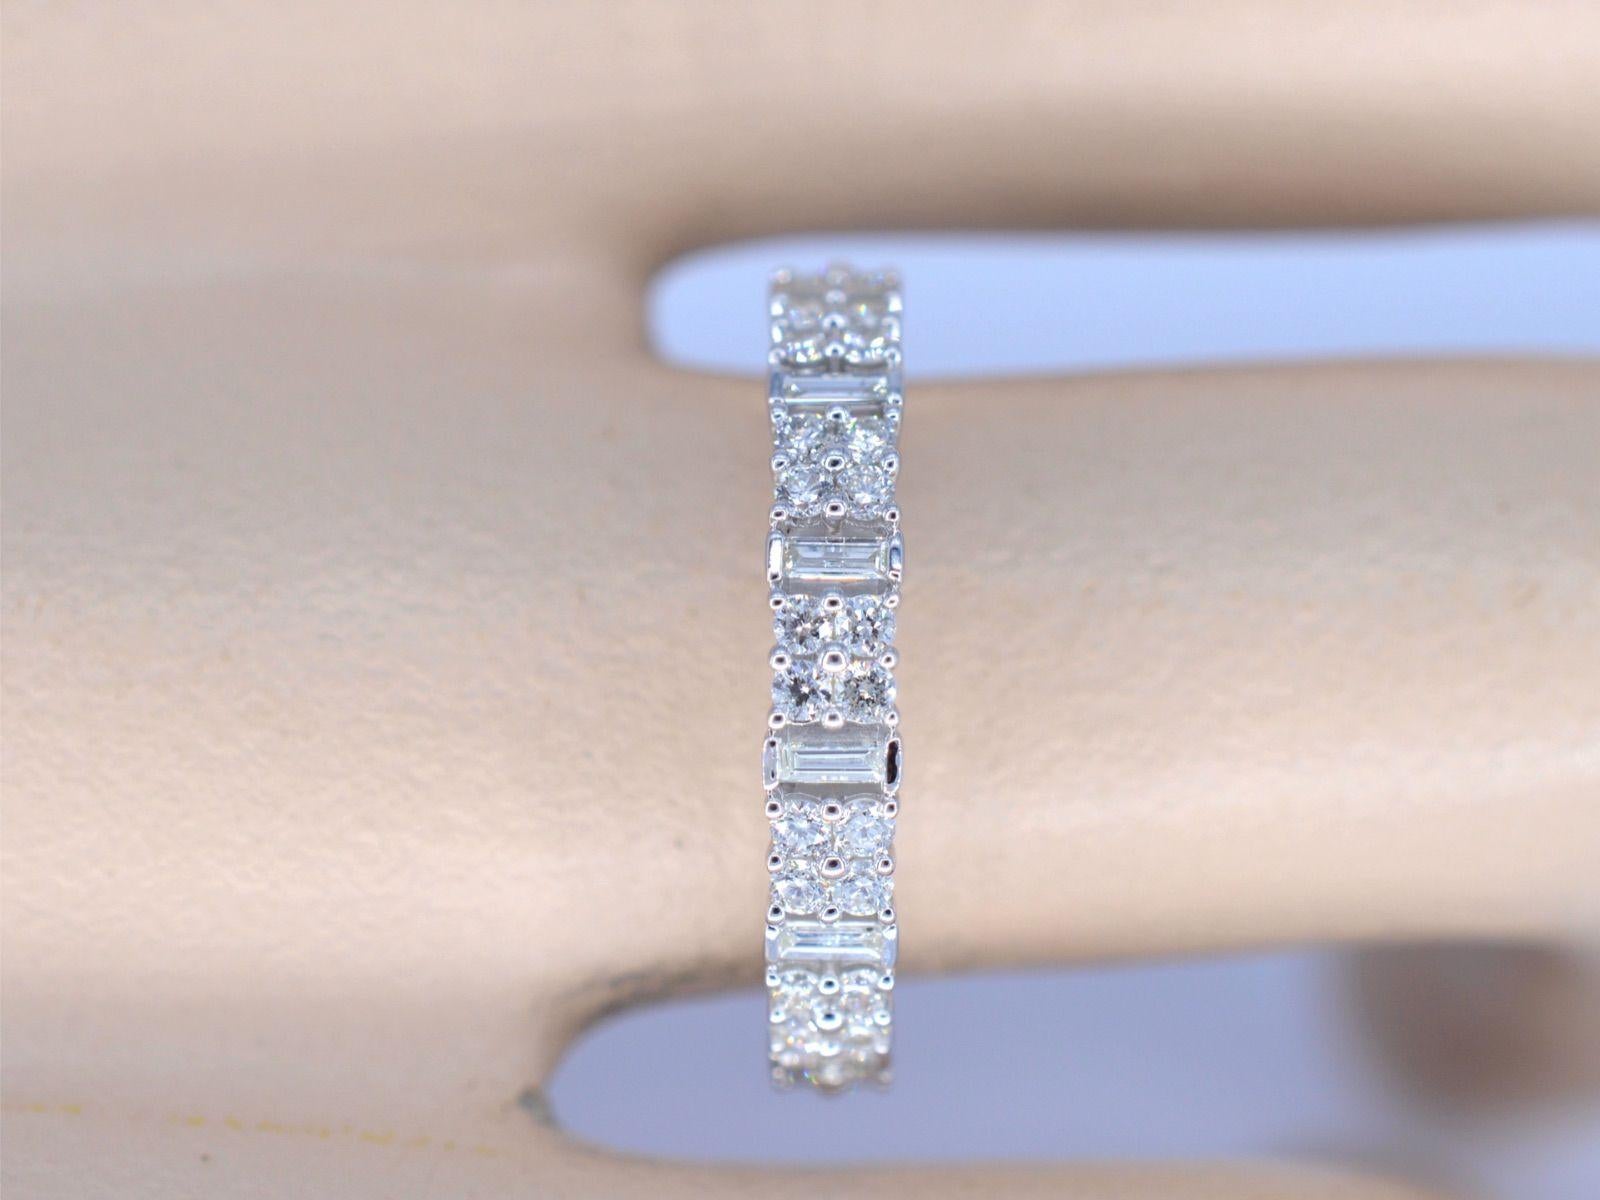 Allow us to introduce you to an exquisite white gold ring, adorned with a stunning row of diamonds. This ring features a breathtaking combination of brilliant and baguette cut diamonds, each one set flawlessly to create a truly mesmerizing design.